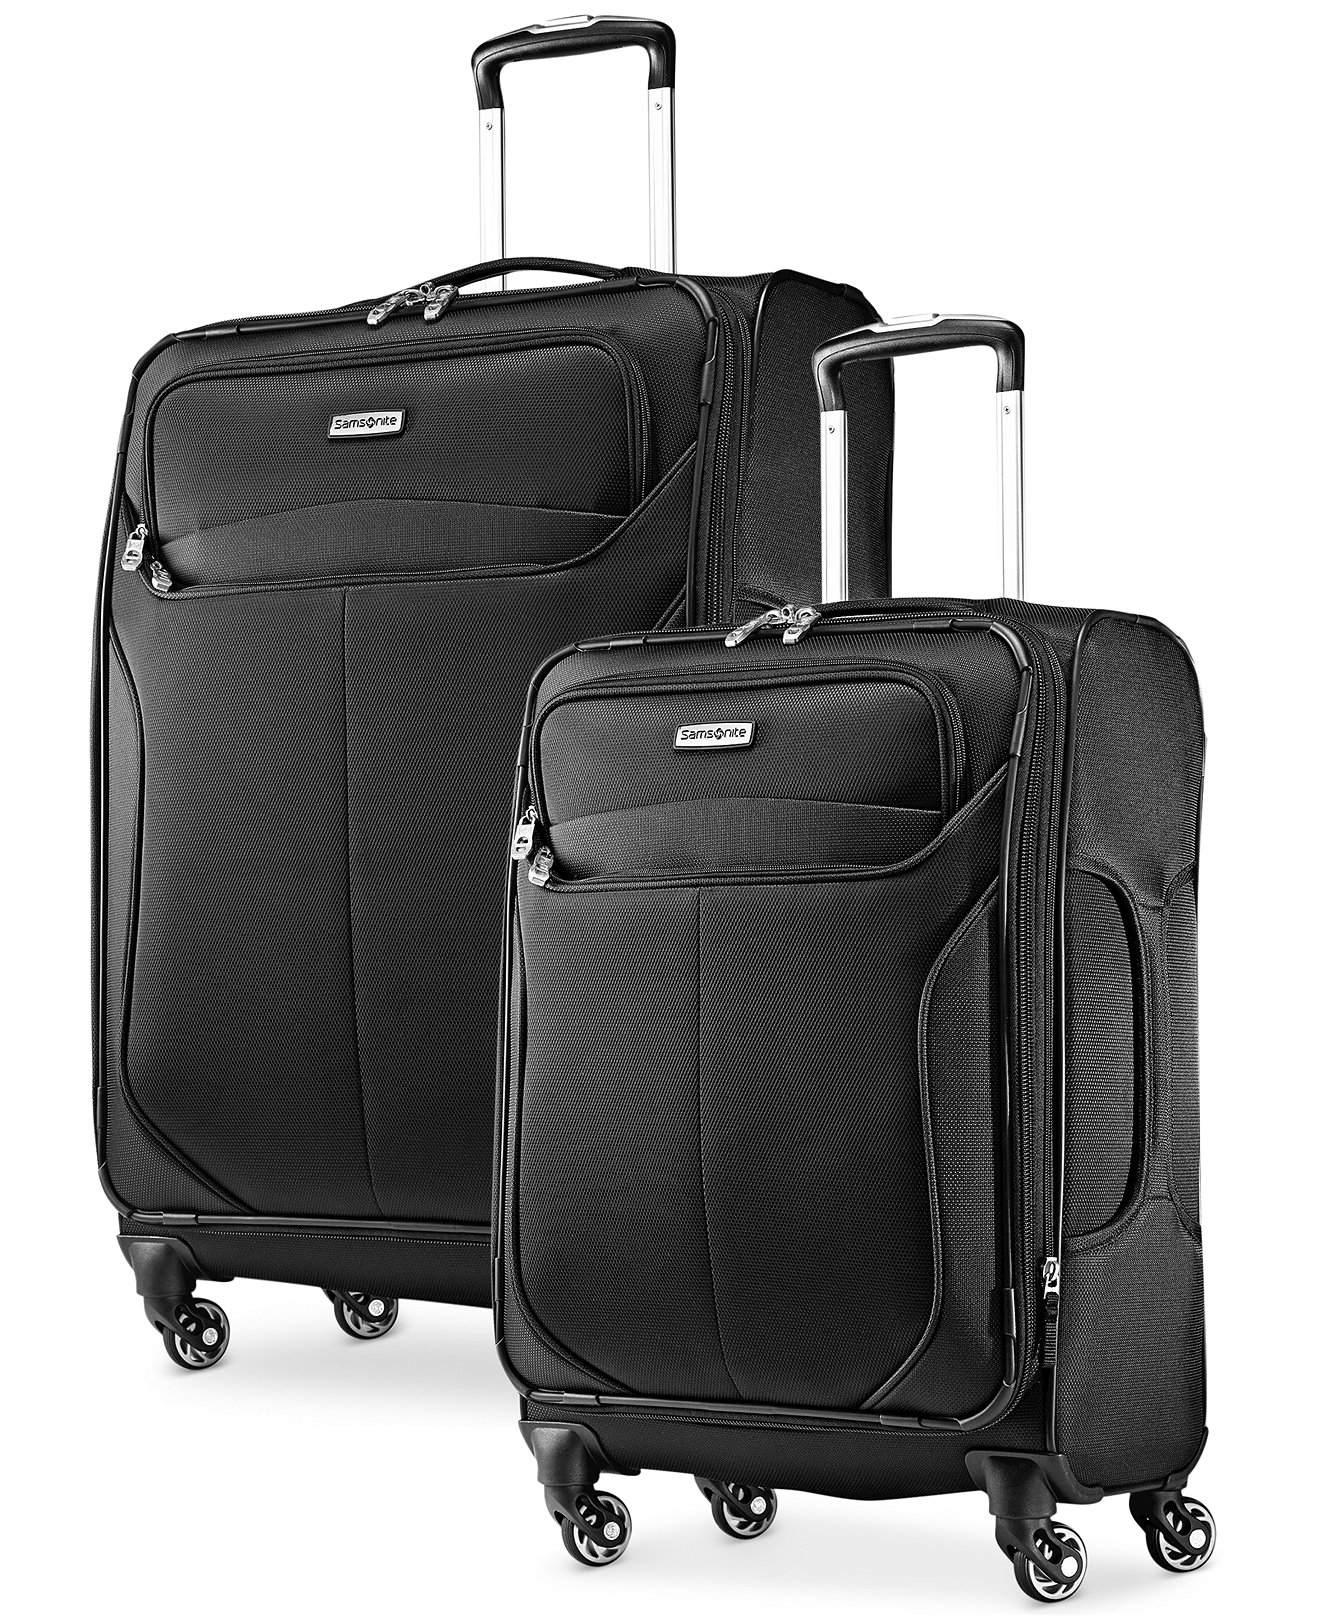 CLOSEOUT! 60% Off Samsonite LifTwo Spinner Luggage - Luggage Collections - luggage & backpacks ...